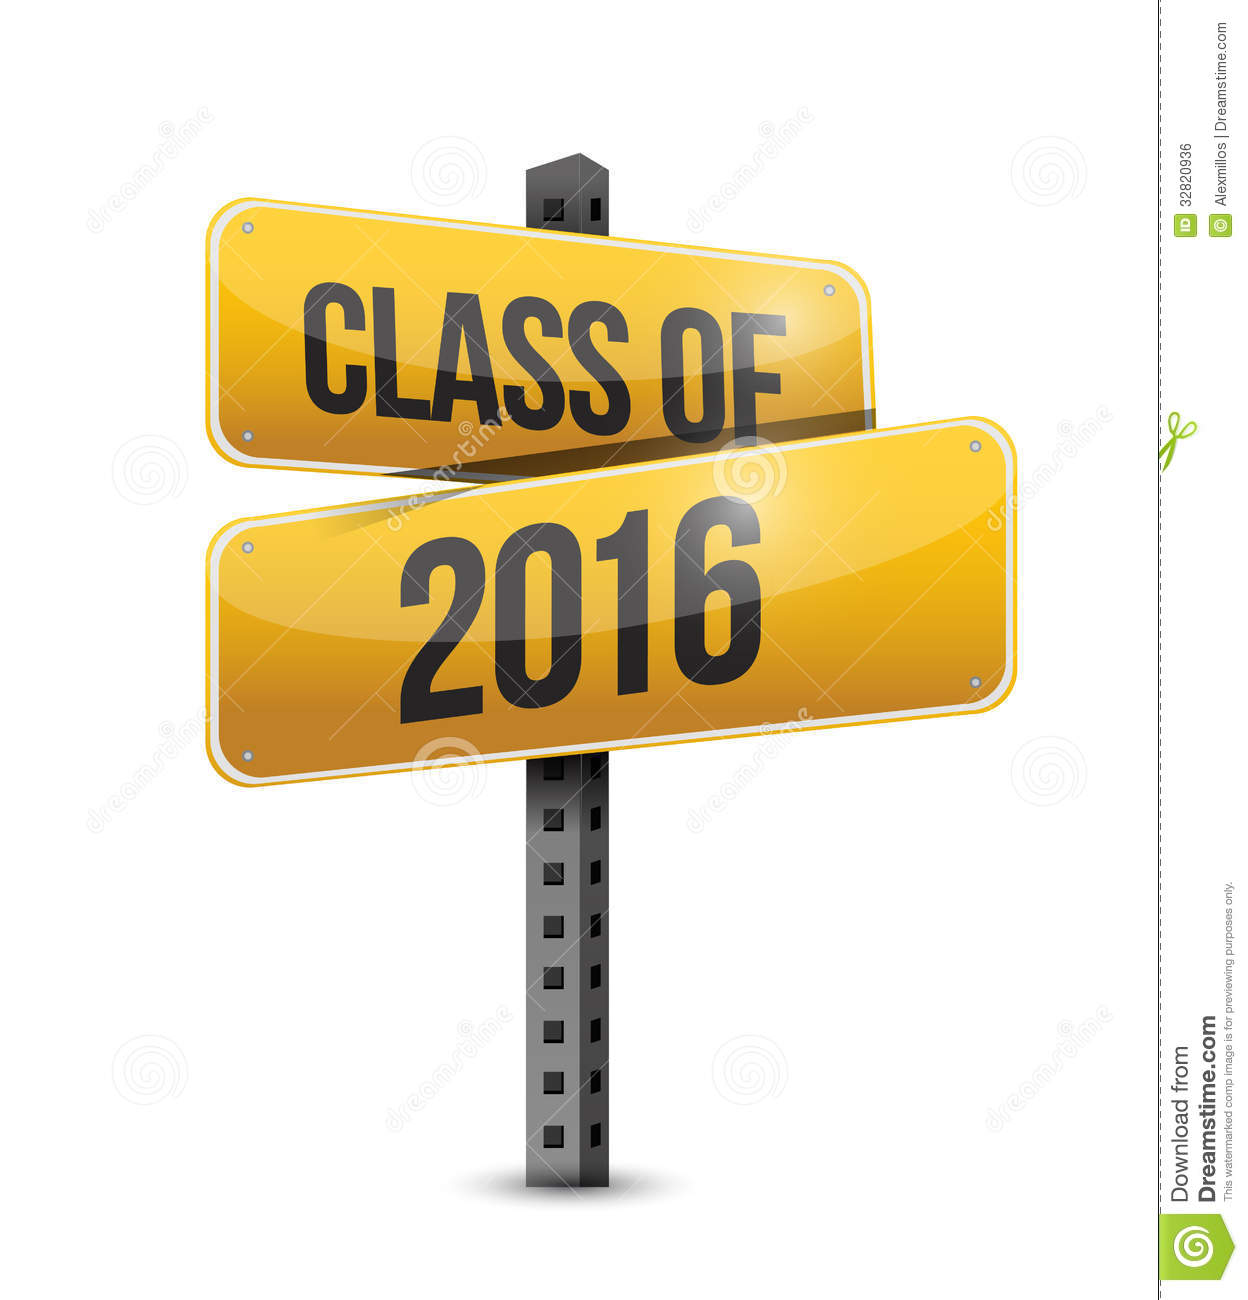 Class Of 2016 Road Sign Illustration Design Royalty Free Stock Image